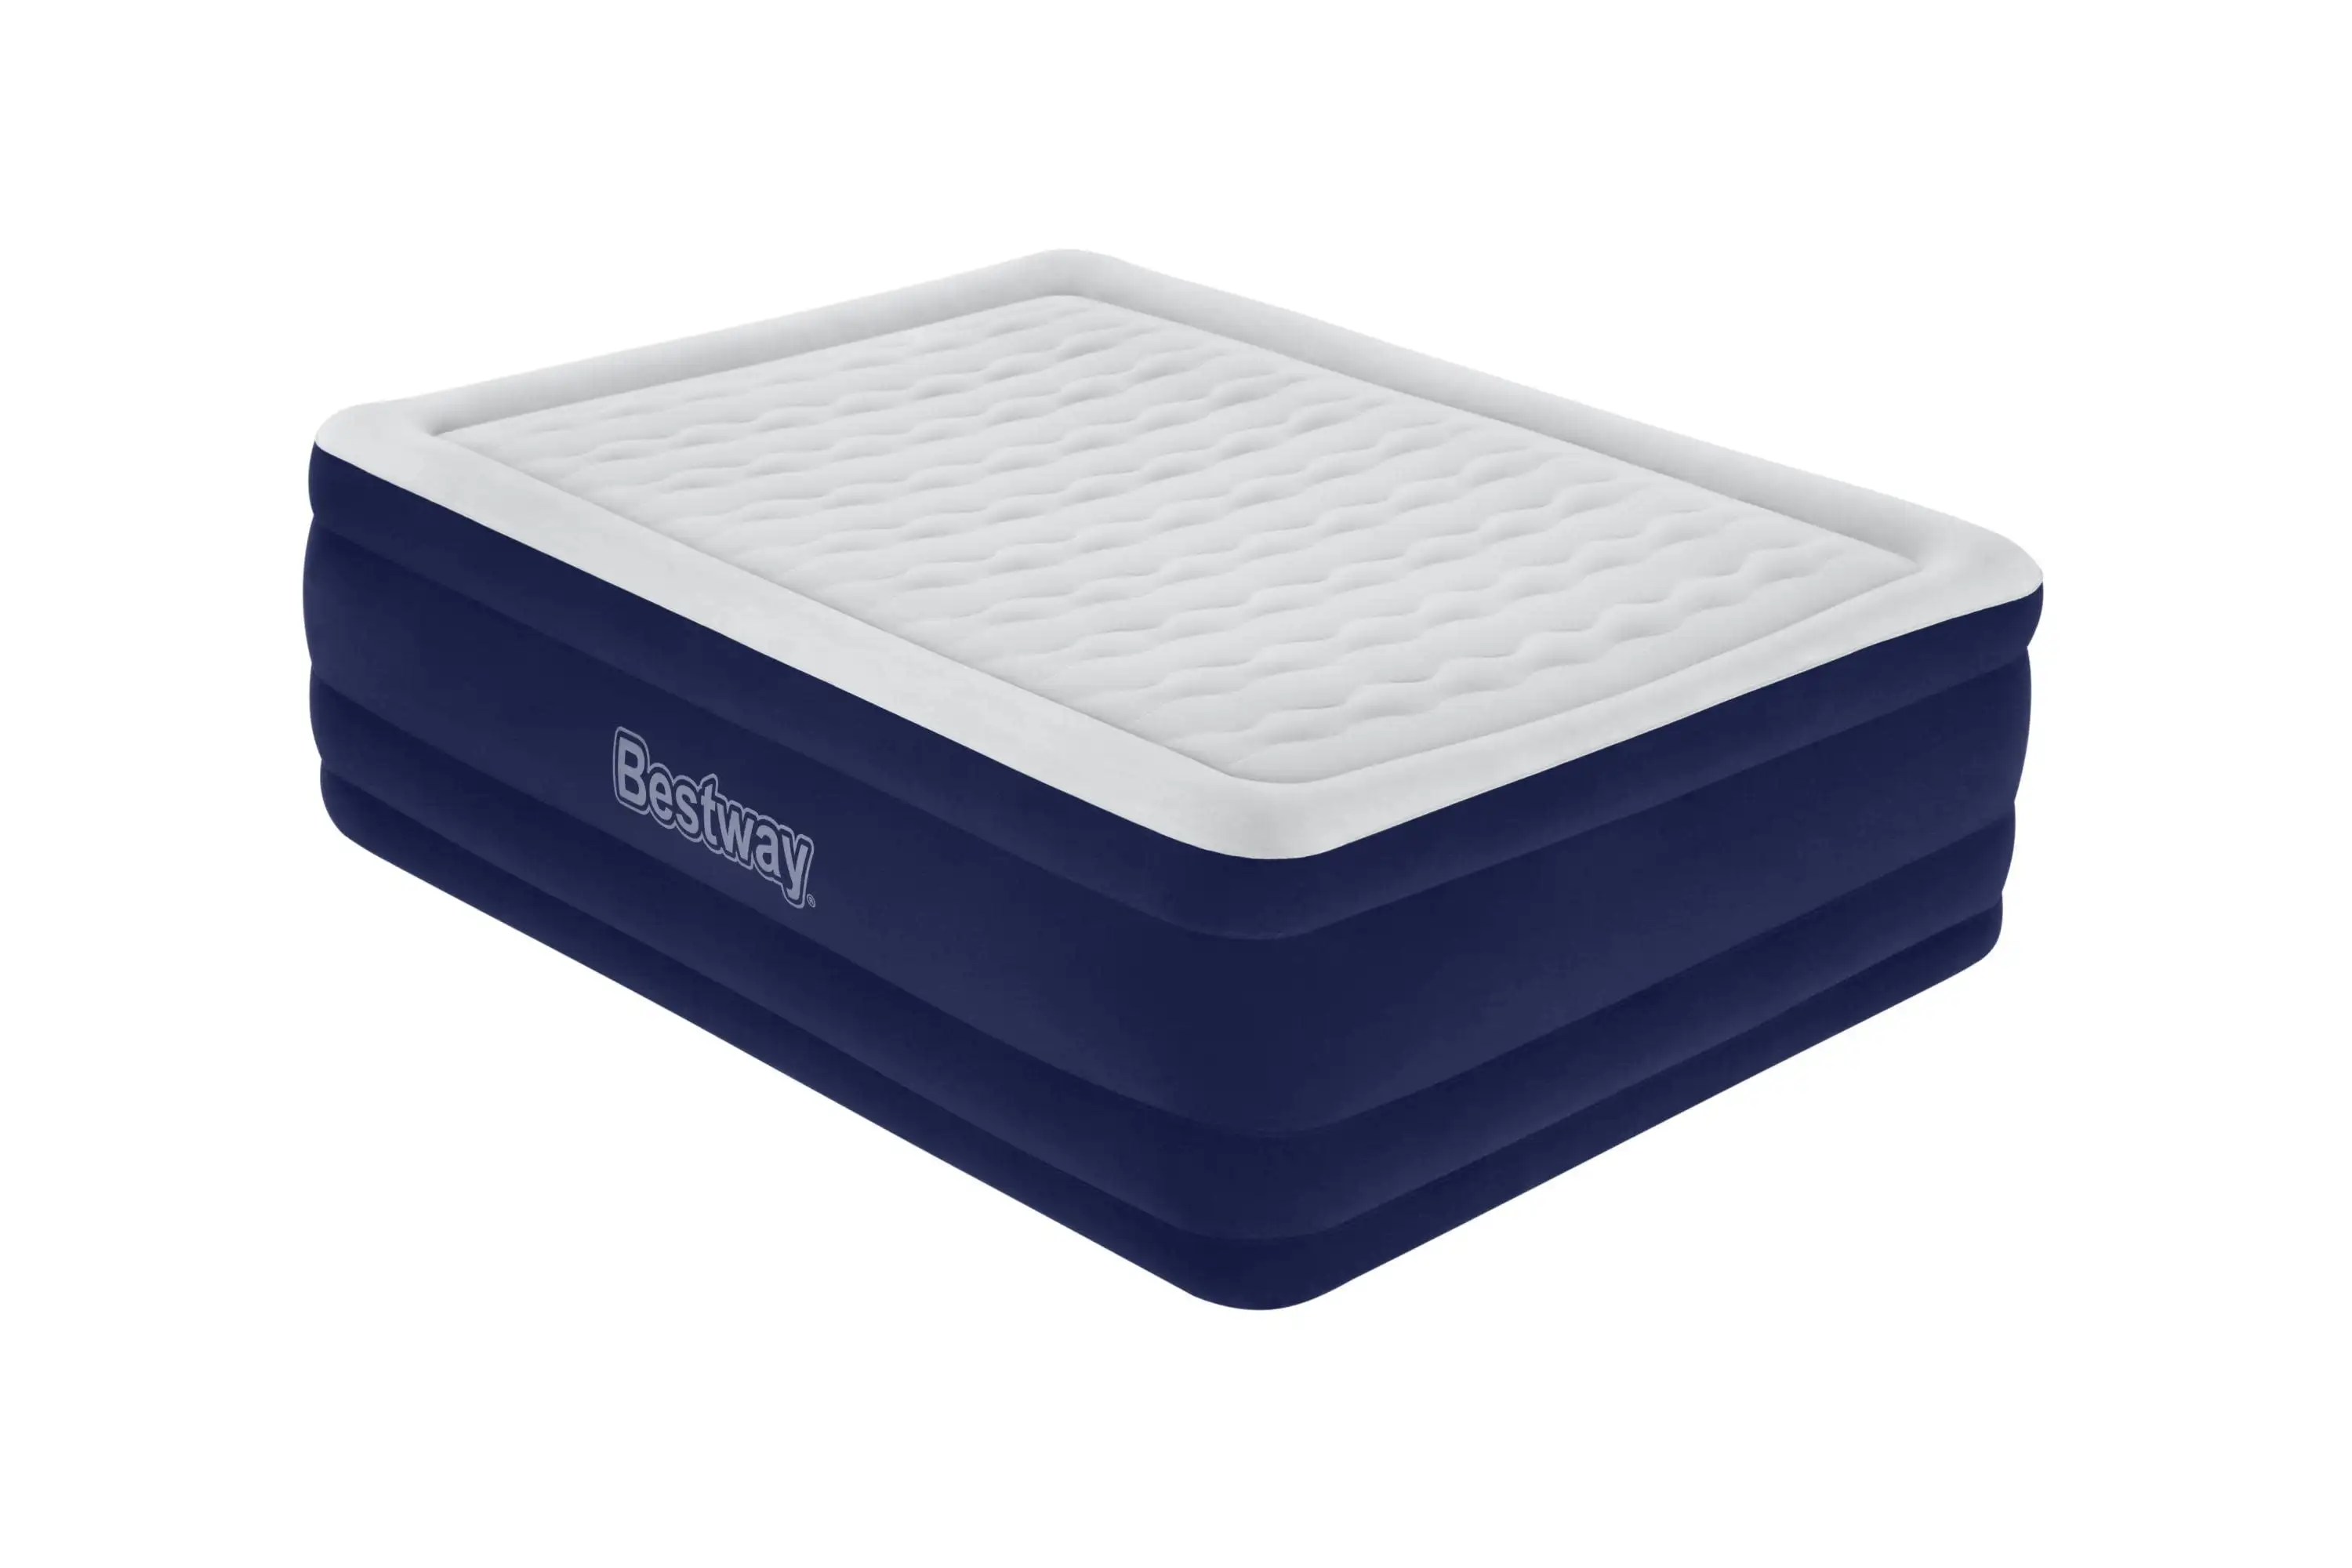 Tritech 24” Air Mattress Antimicrobial Coating with Built-in AC   Queen